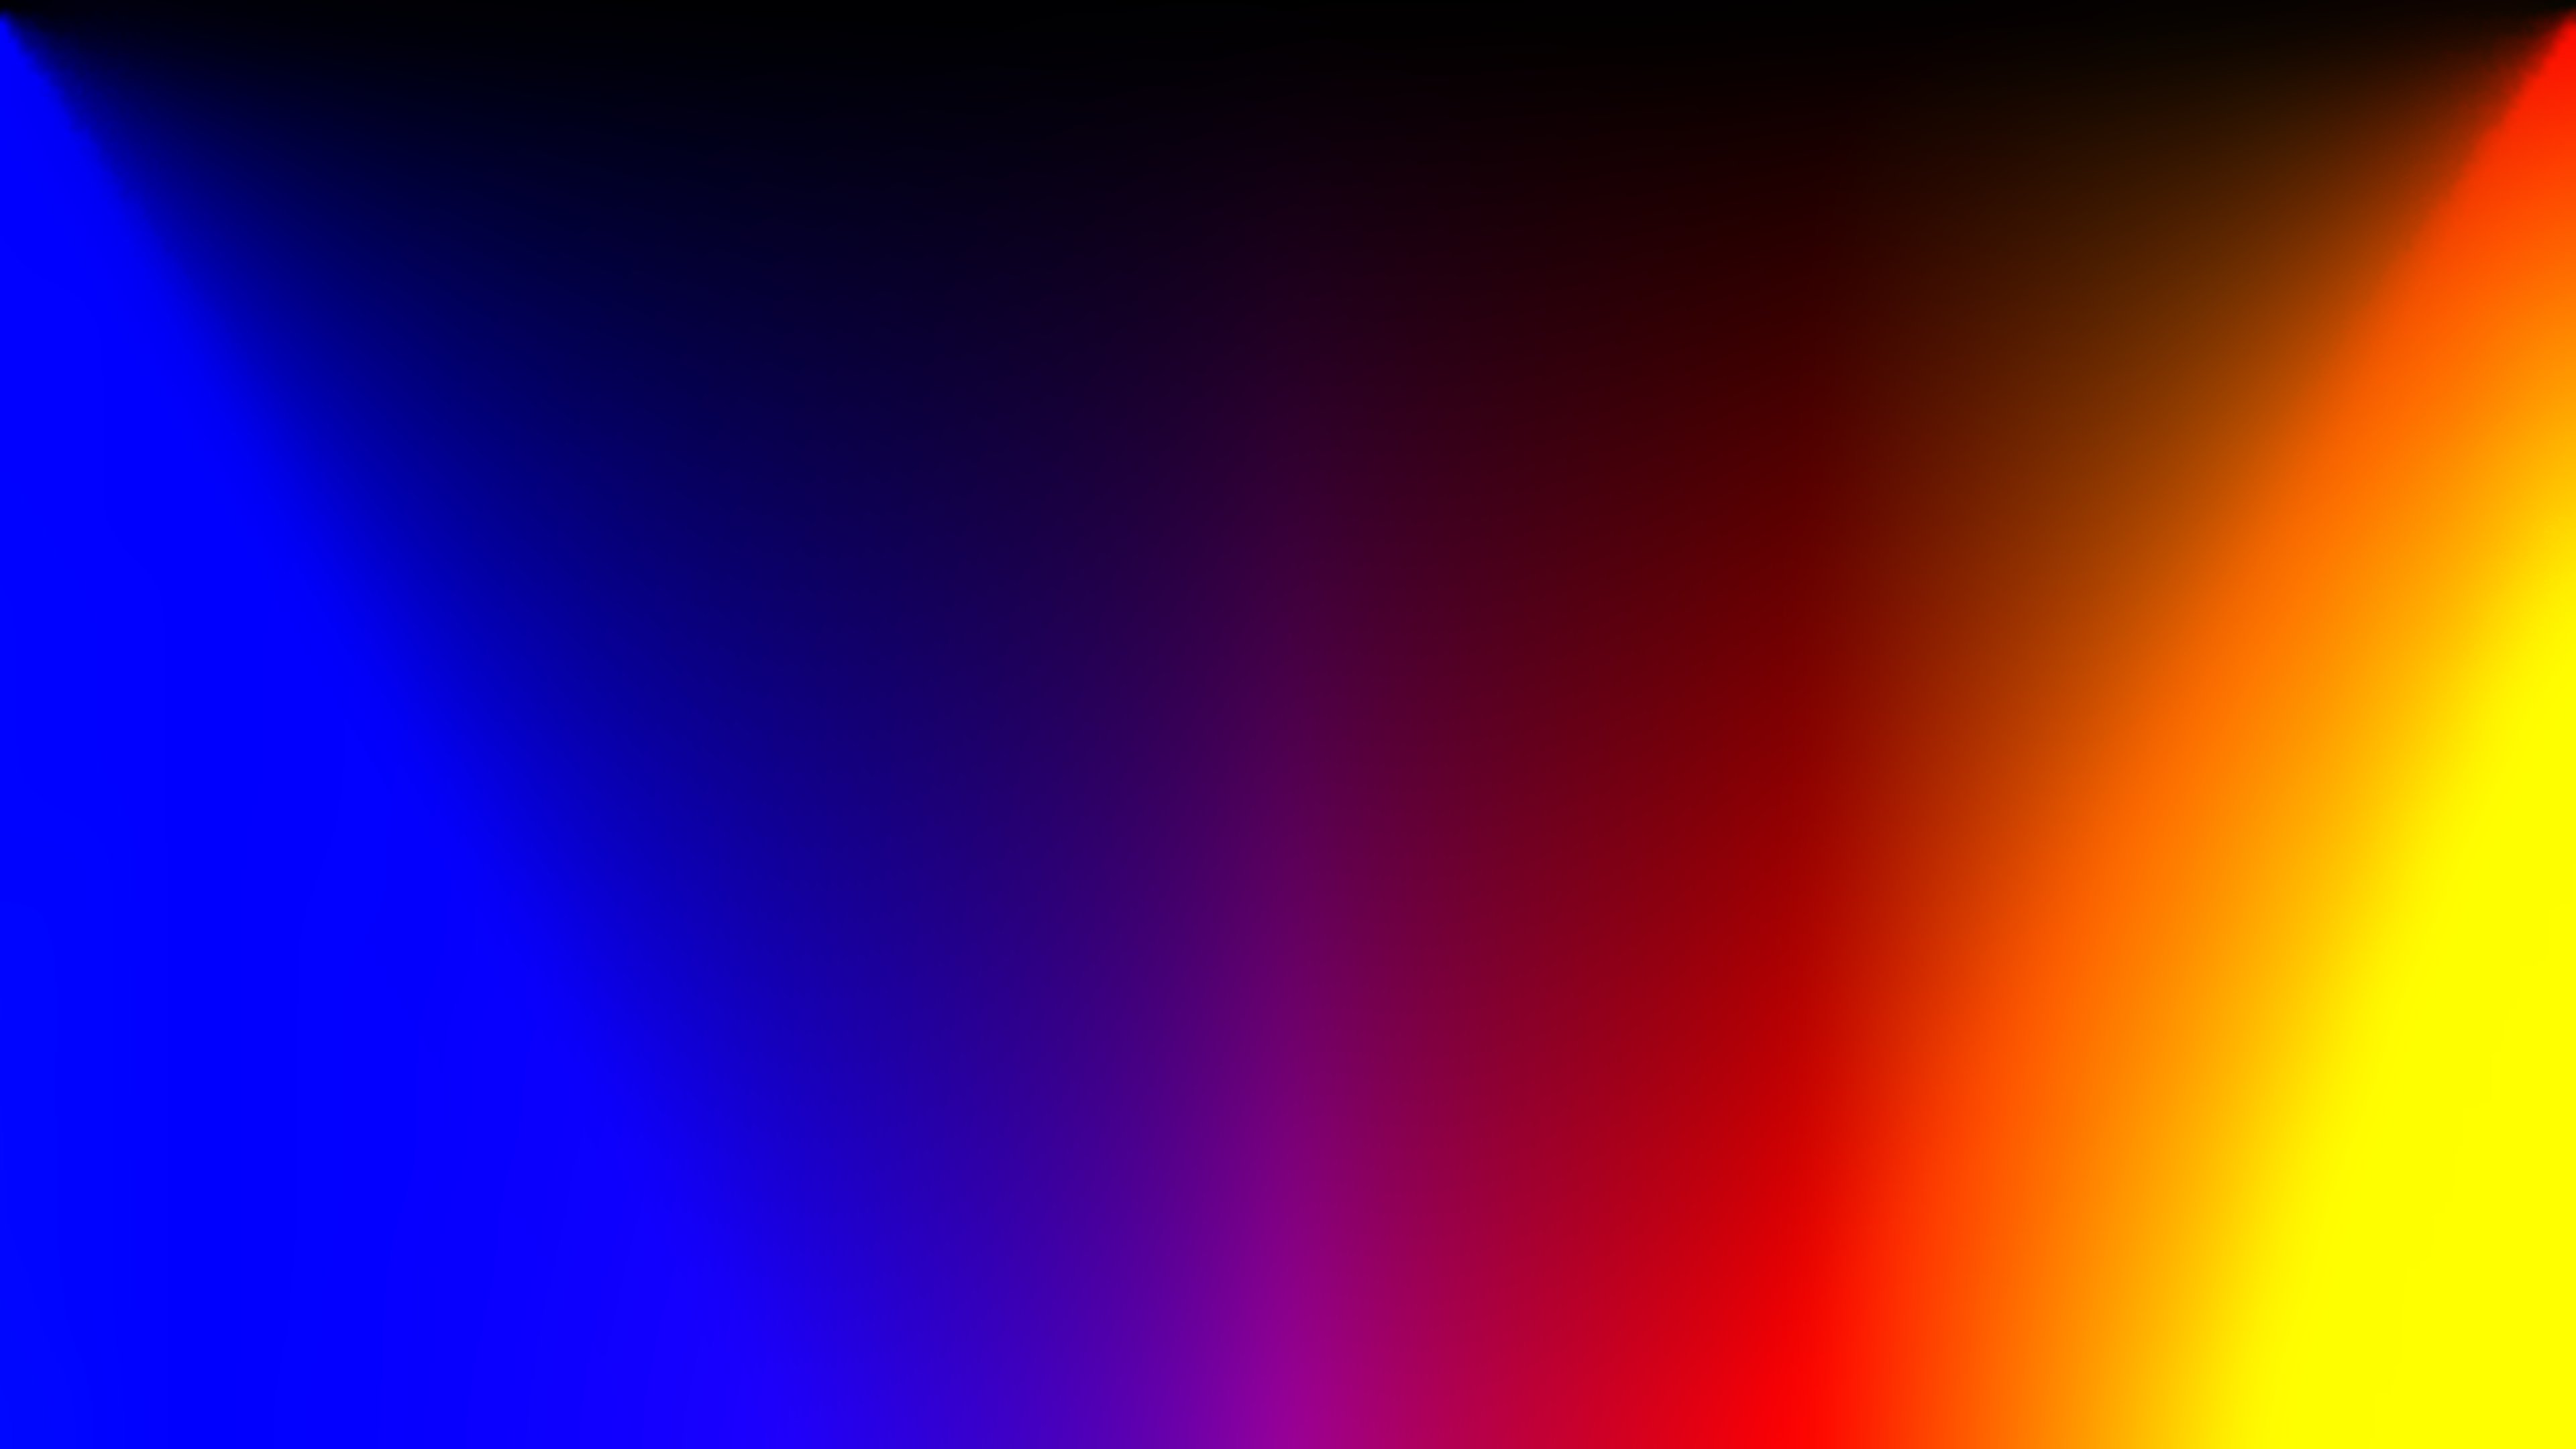 colors, Colorful, Abstract, Blue, Purple, Red, Orange, Yellow Wallpaper